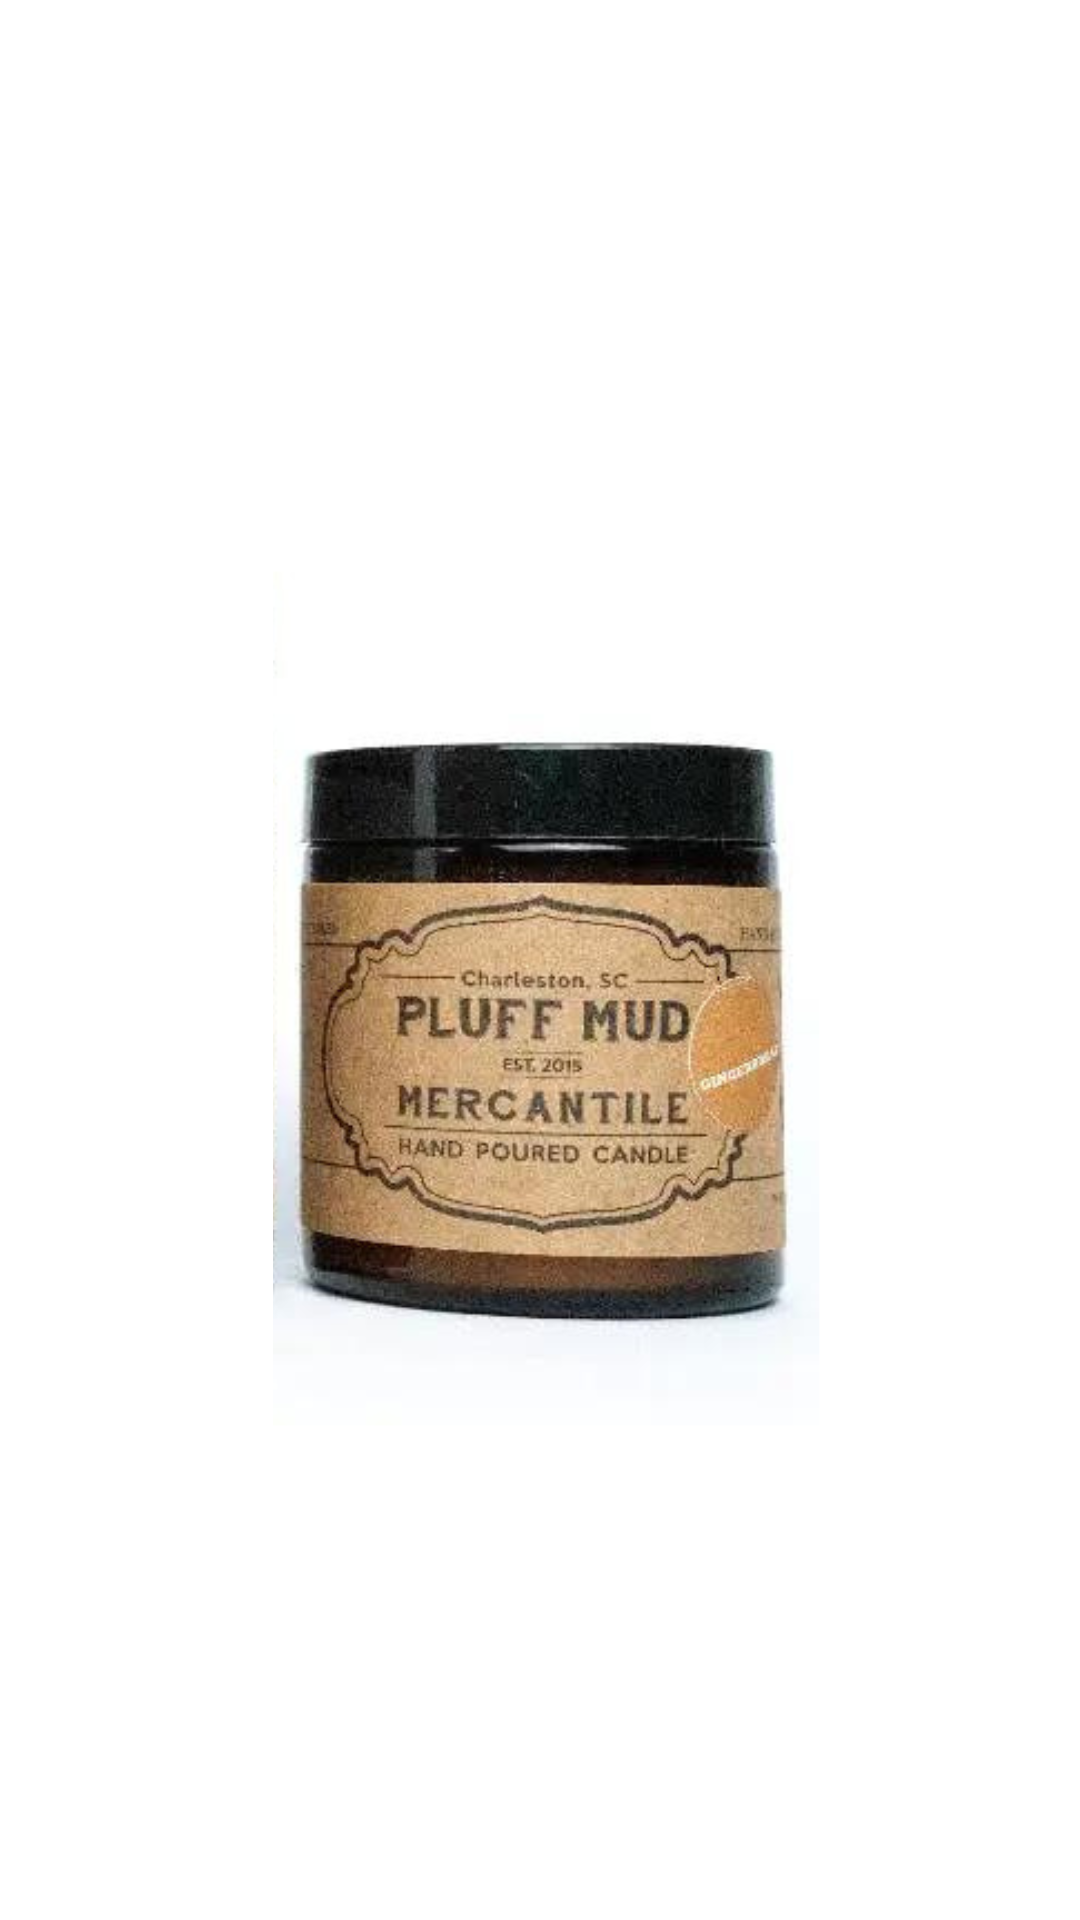 Welcome Home Hand Poured Soy Candle - Pluff Mud Mercantile